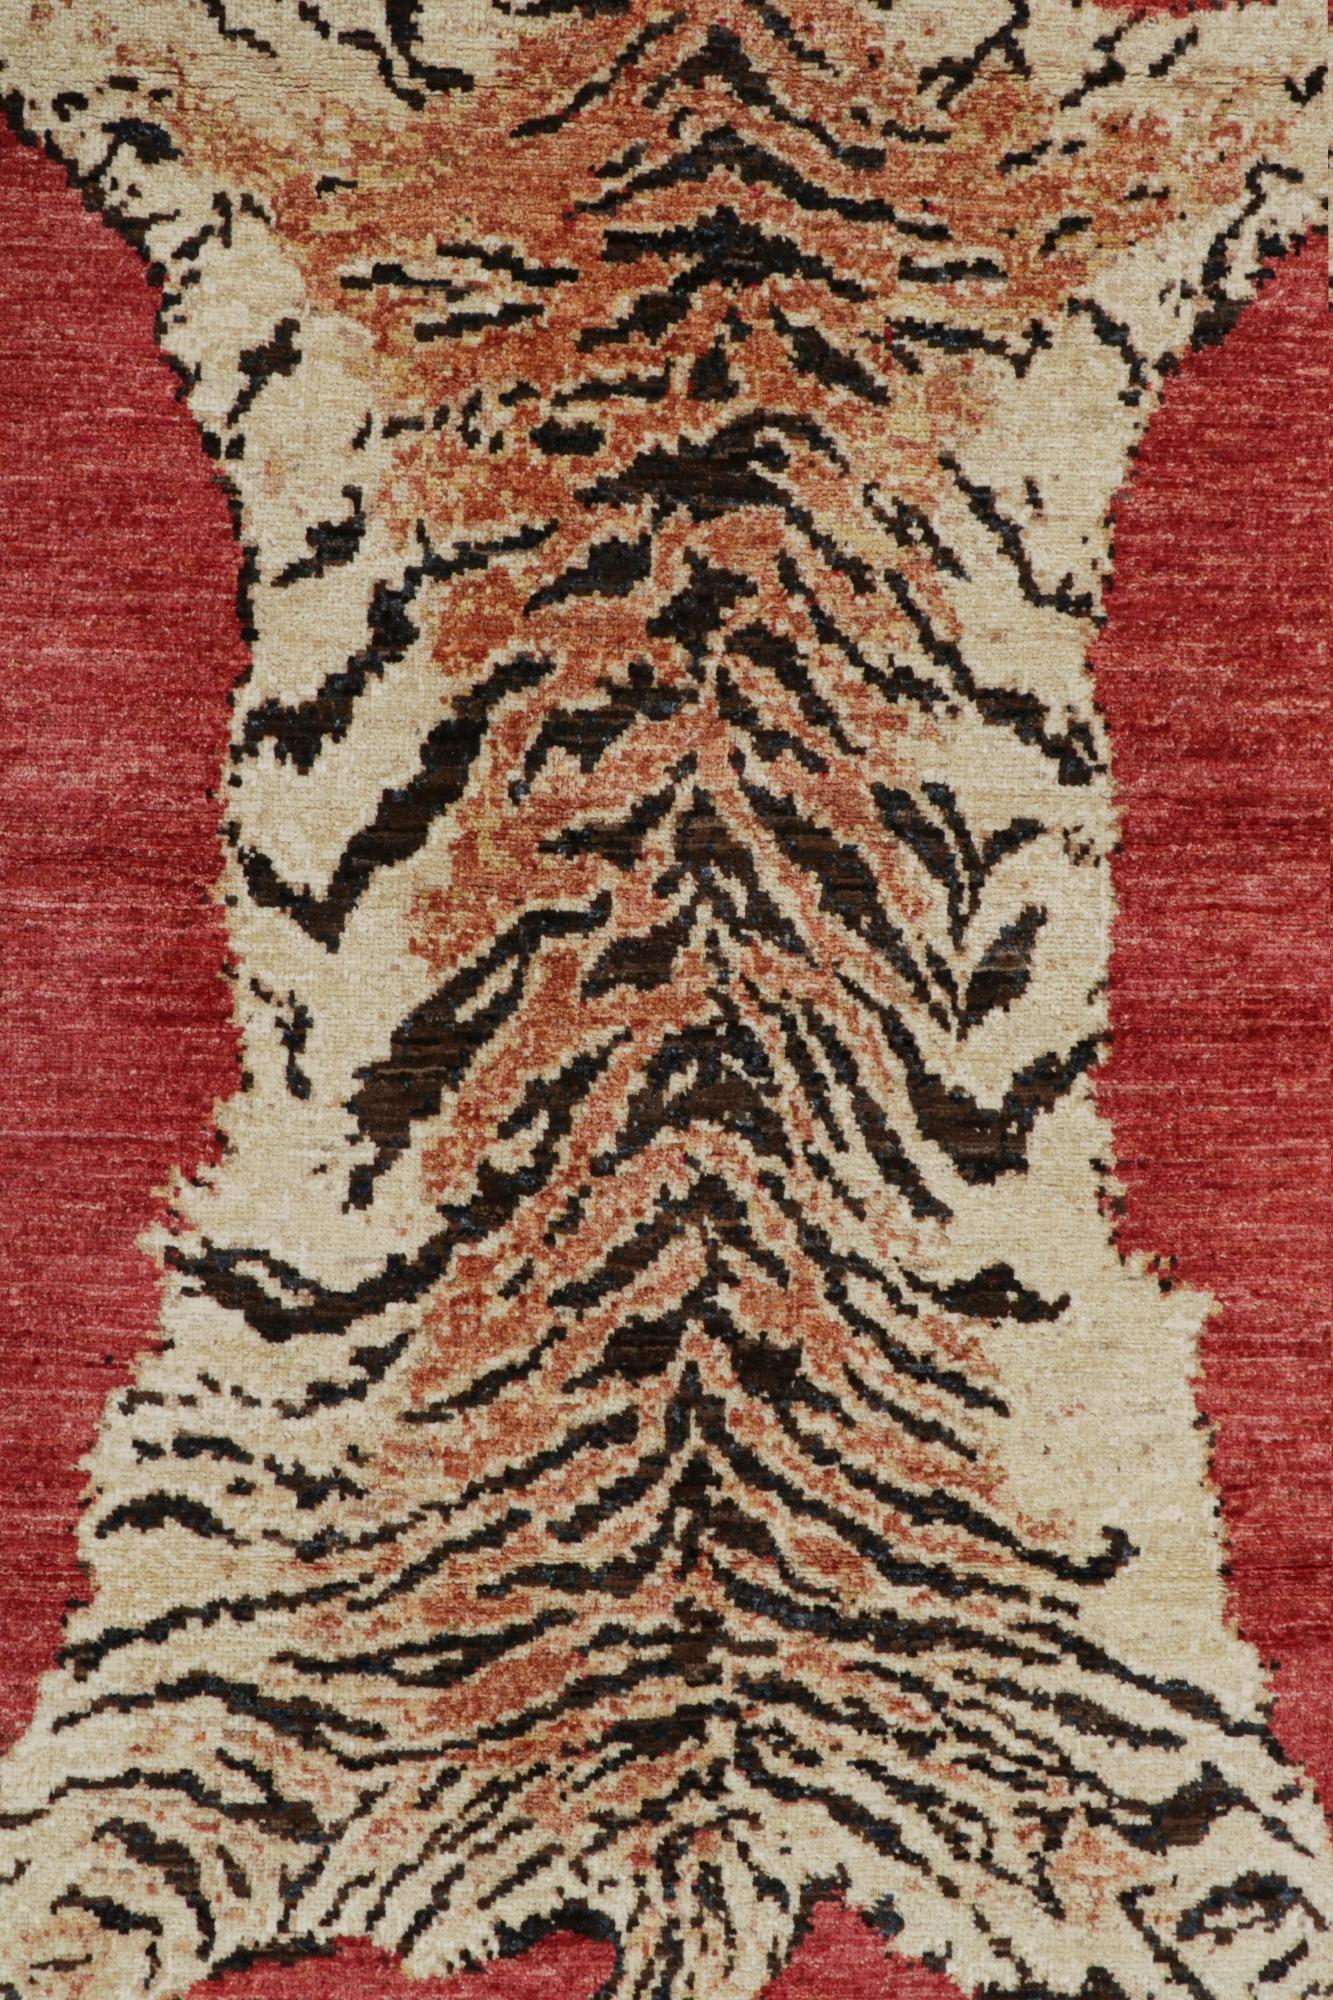 Rug & Kilim’s Tiger-Skin Rug in Red with Beige-Brown Pictorial In New Condition For Sale In Long Island City, NY